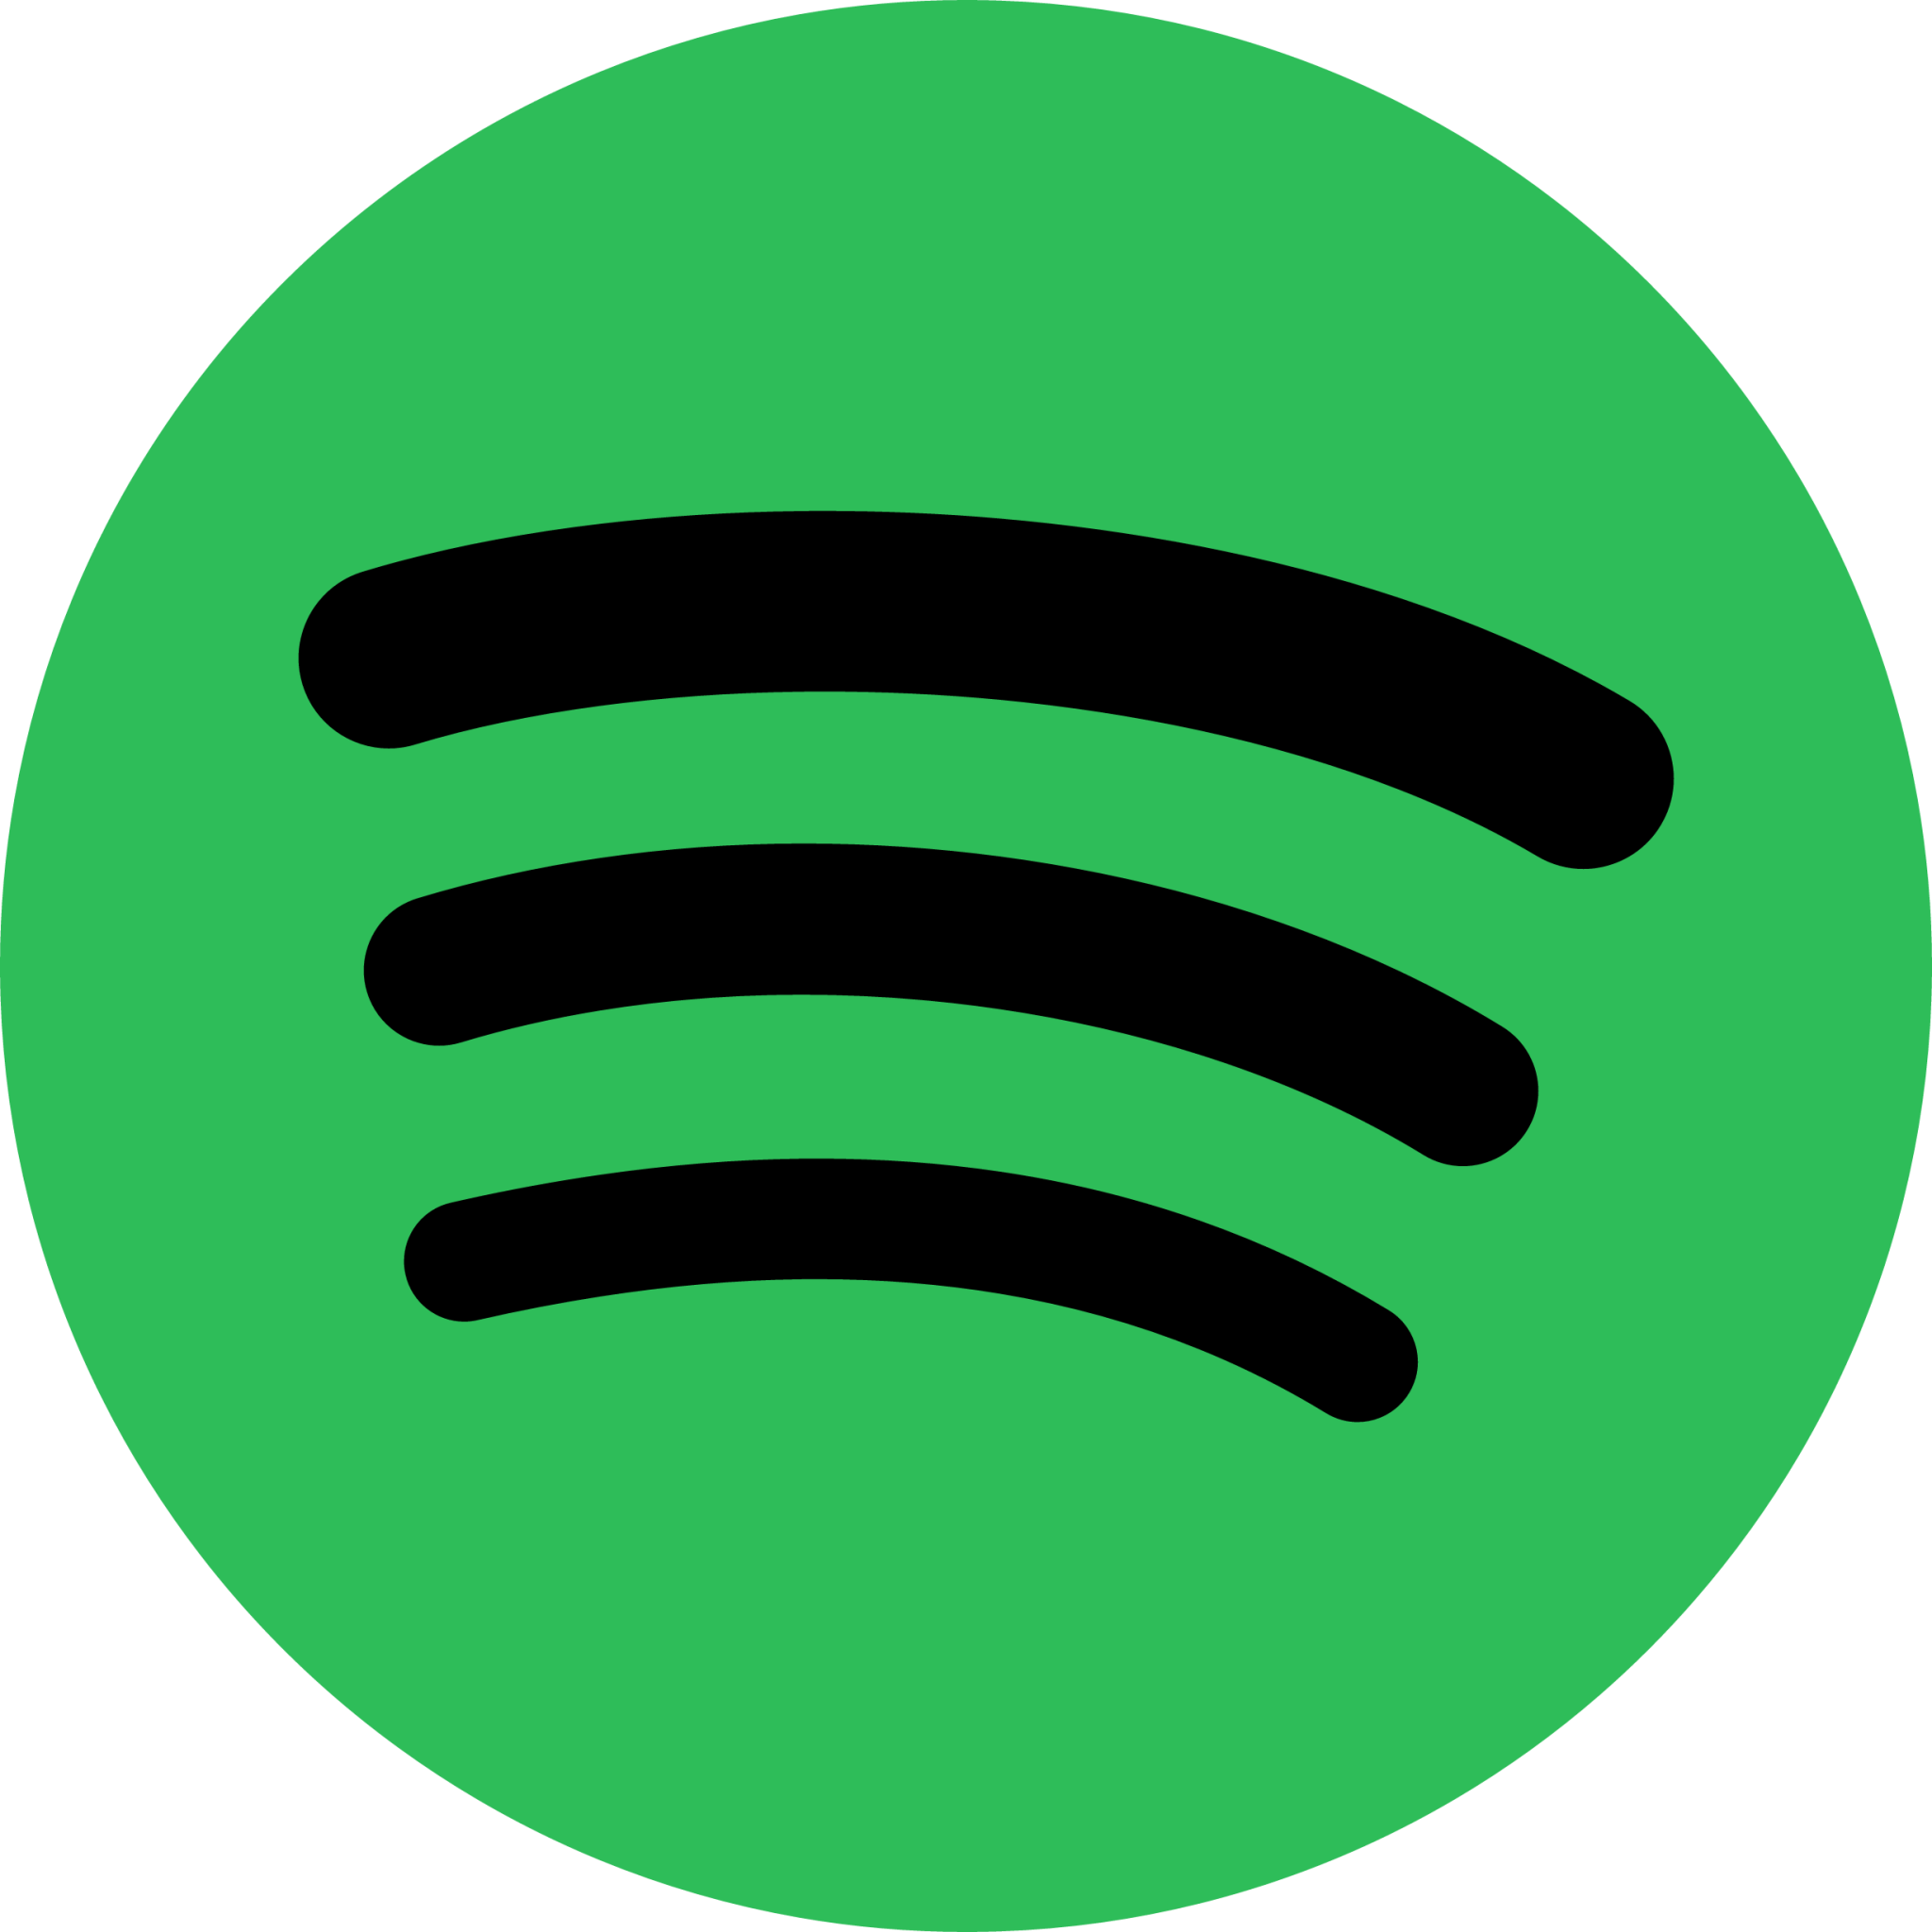 spotify Icon - Download for free – Iconduck